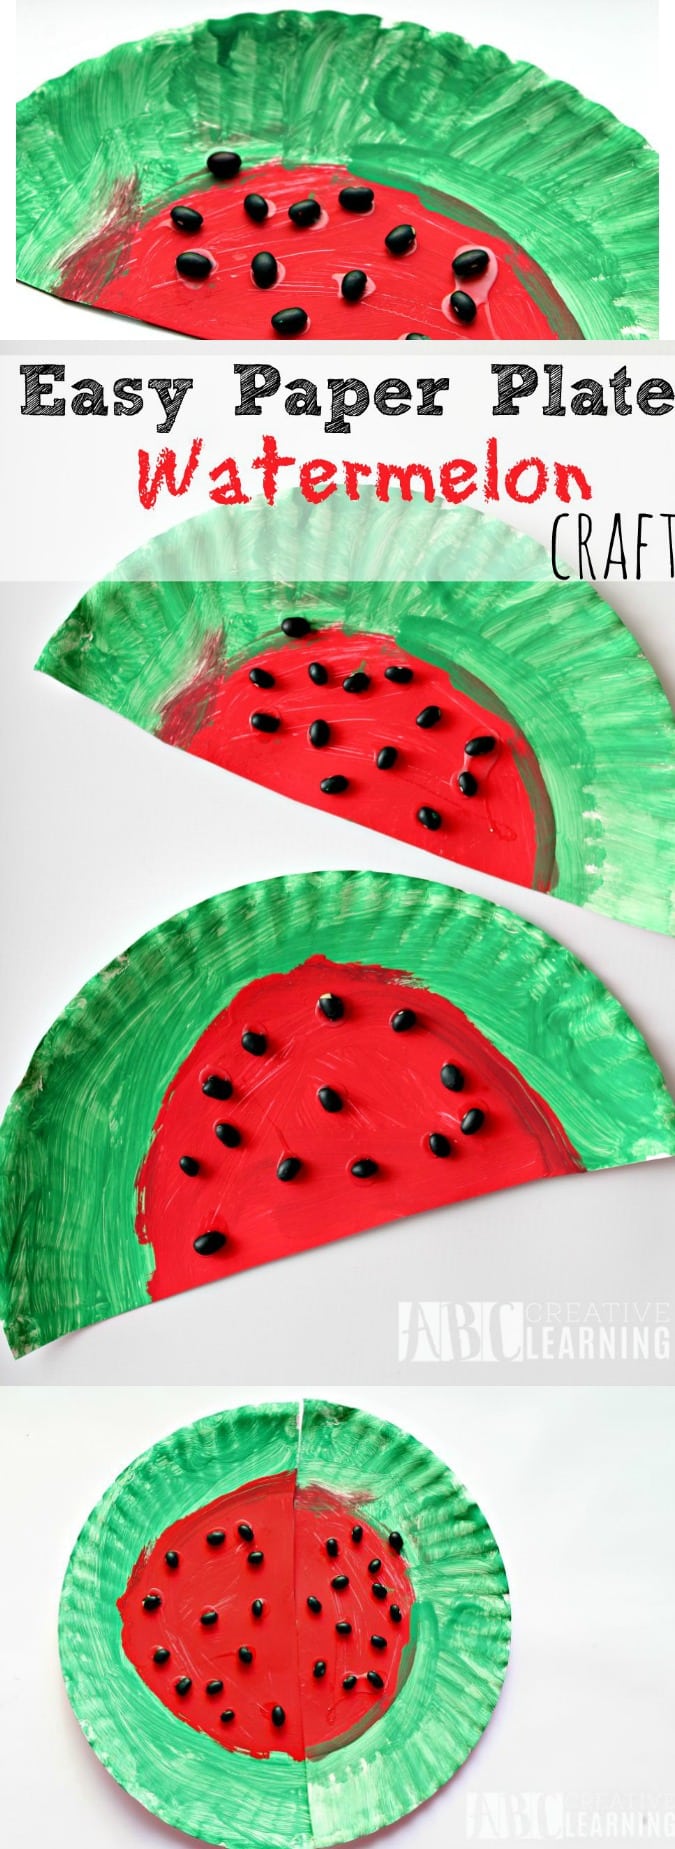 Easy Paper Plate Watermelon Craft - simplytodaylife.com